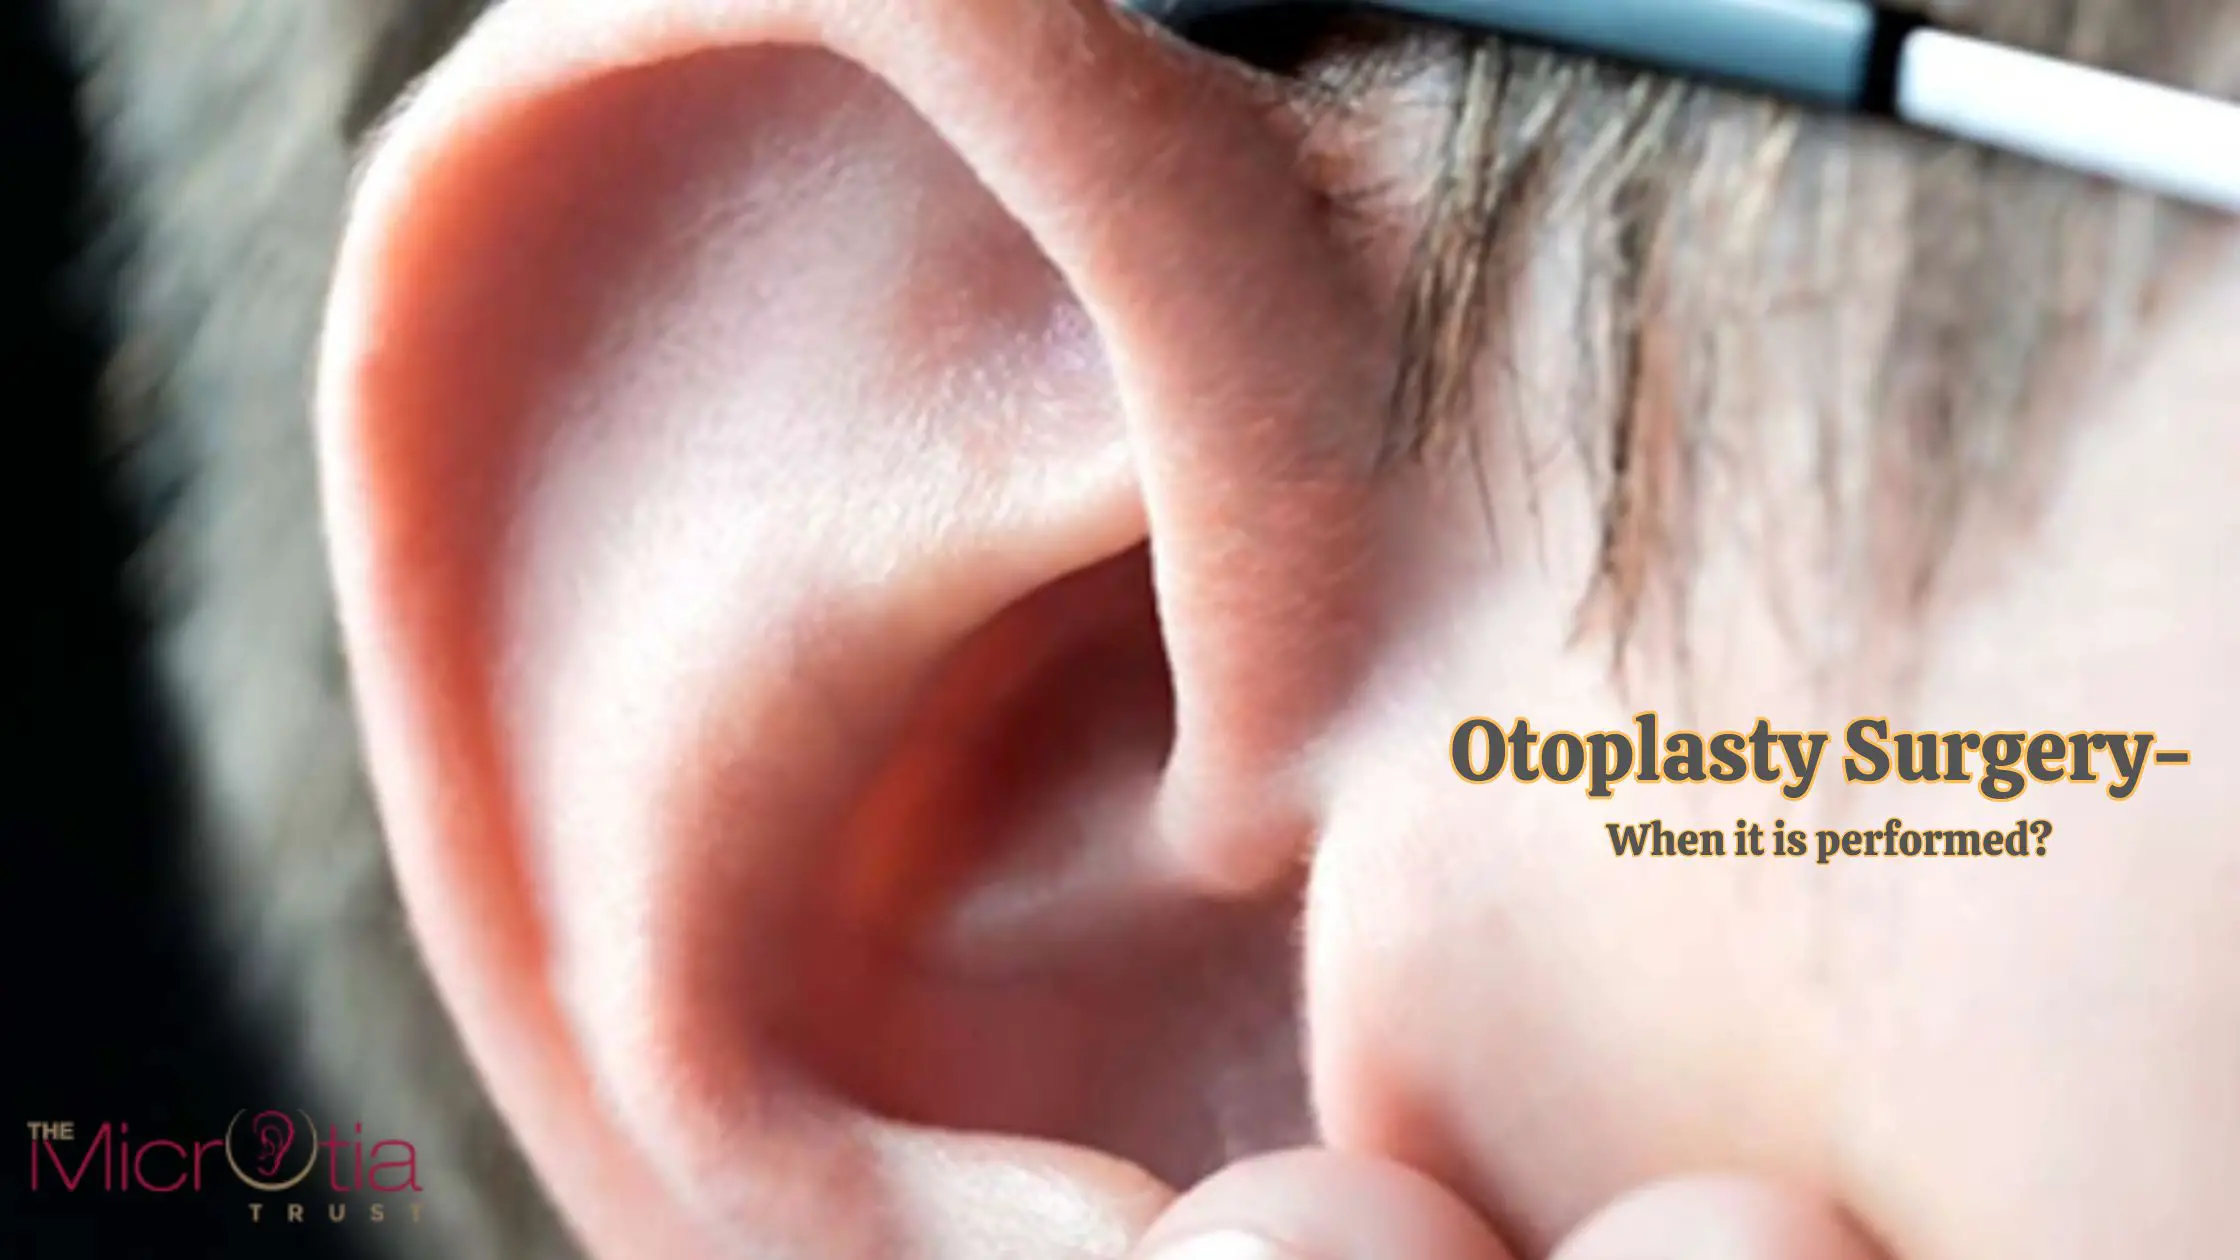 Otoplasty Surgery- When it is performed